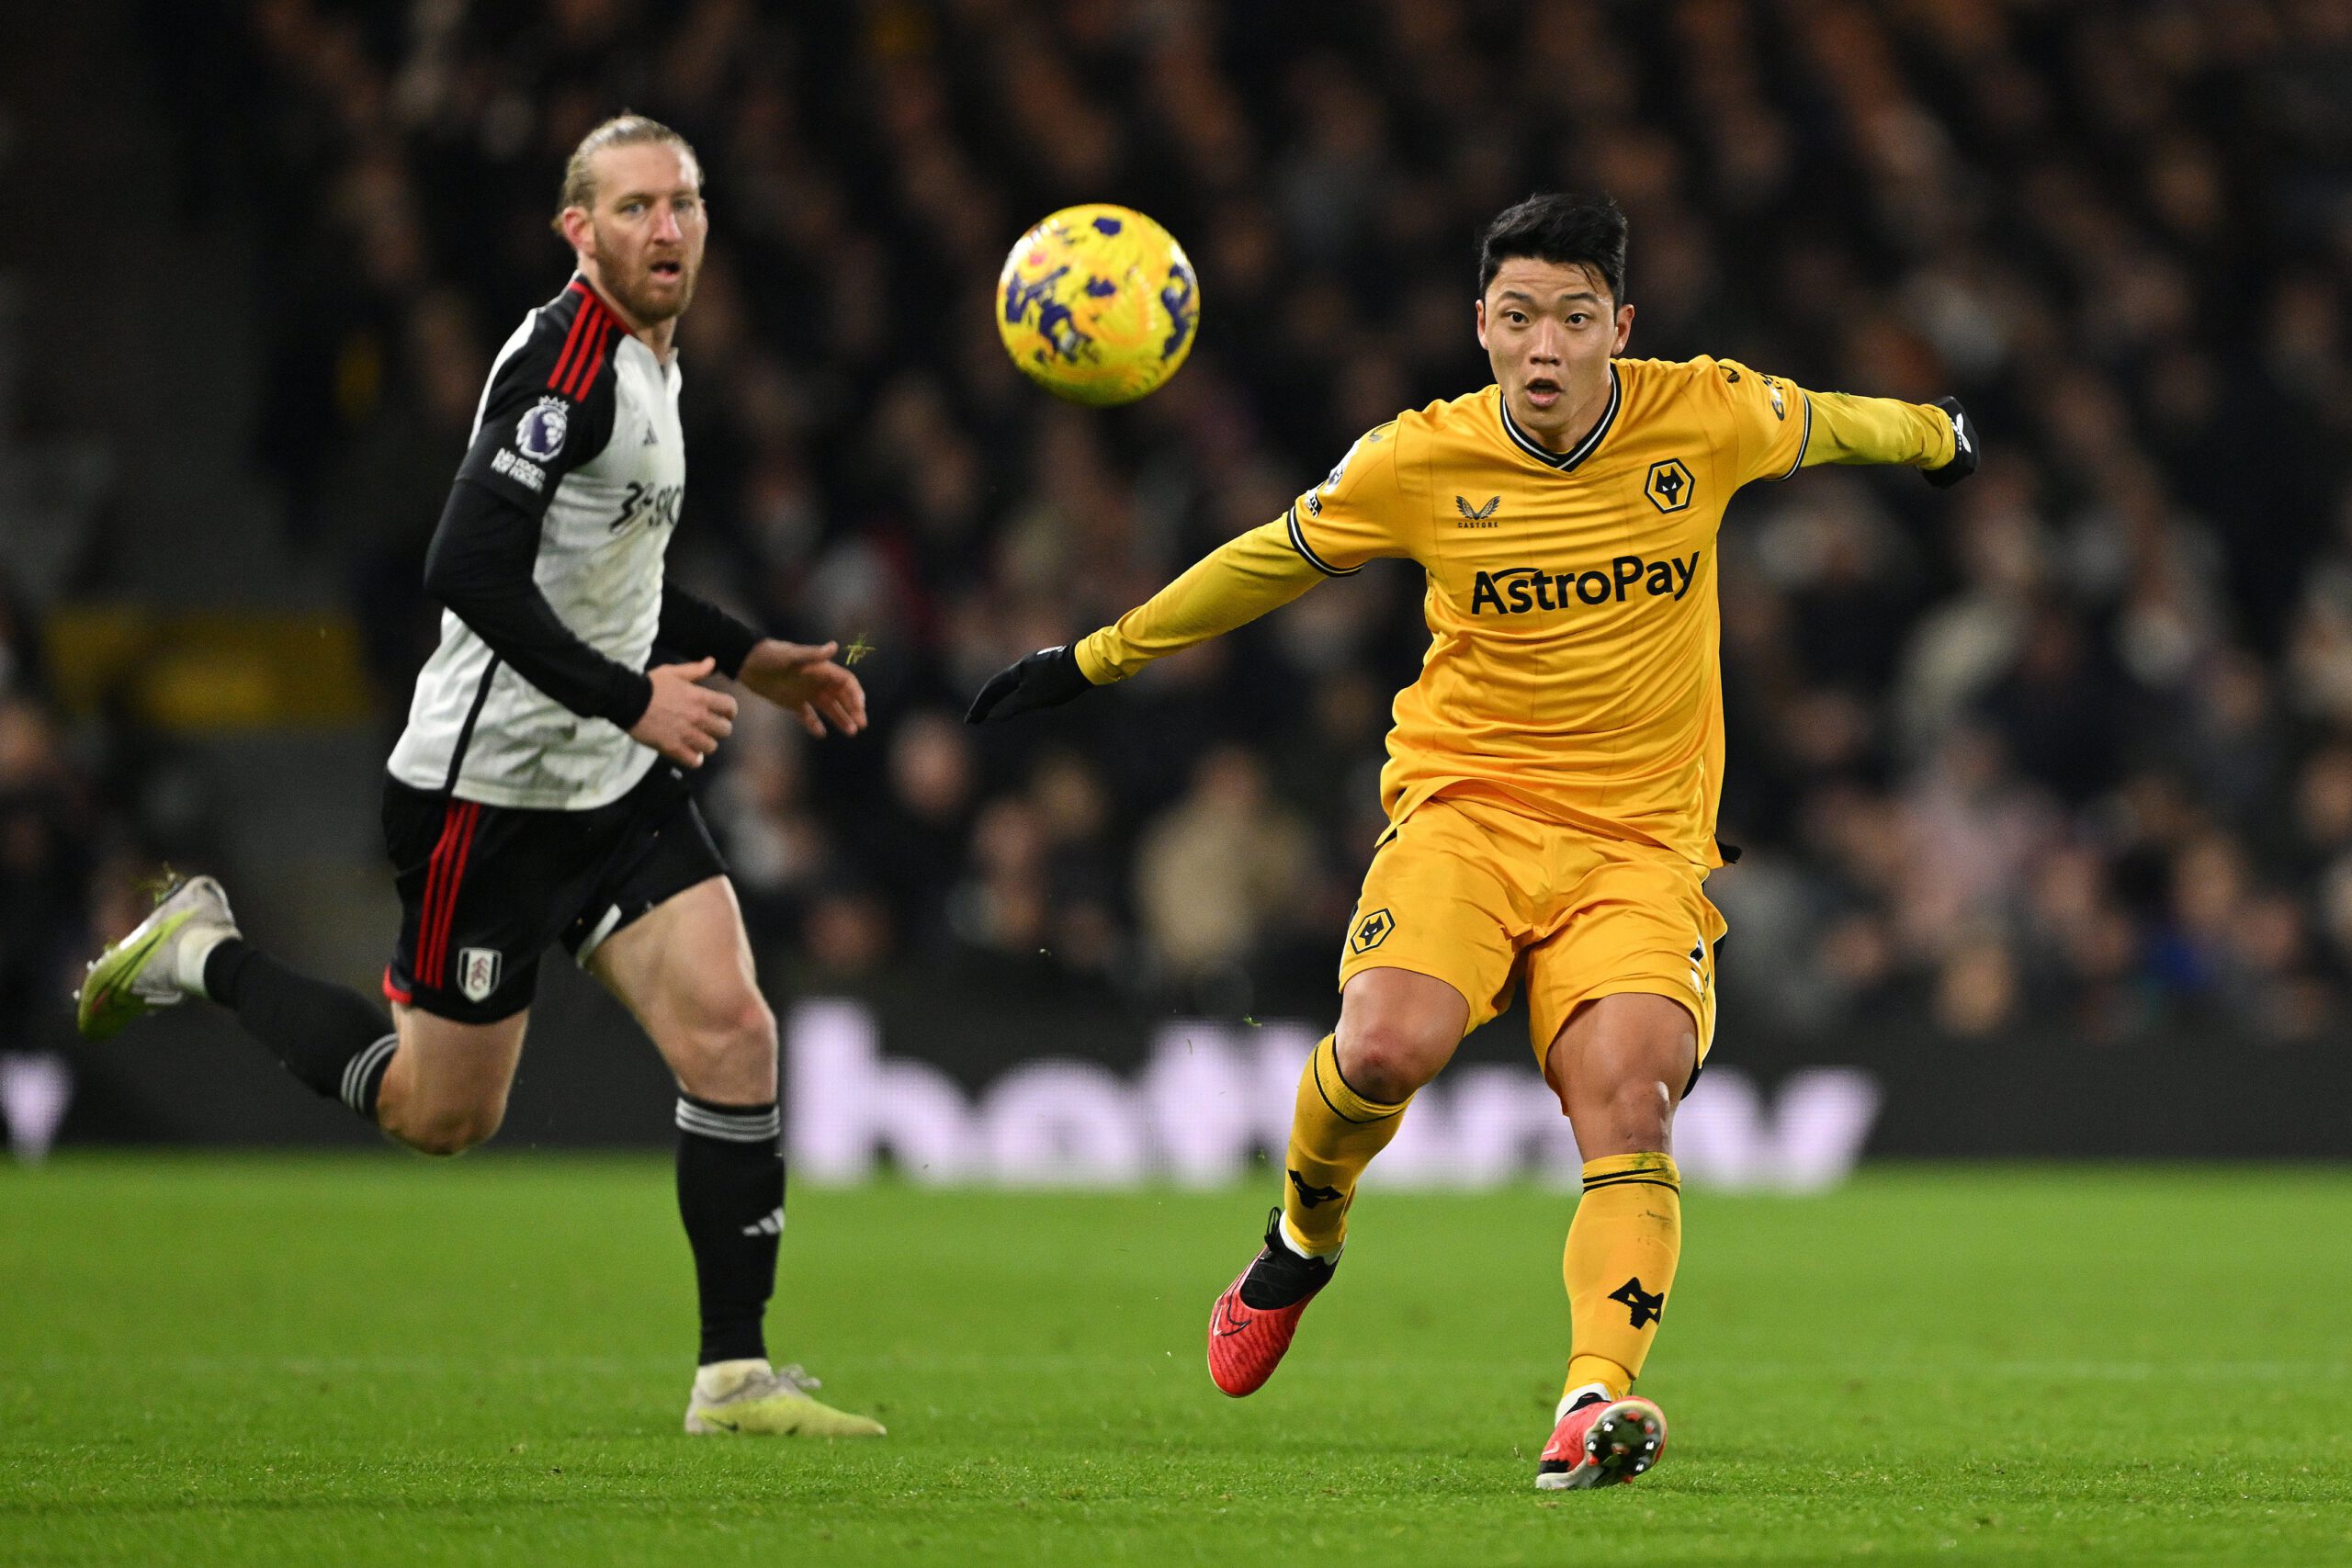 Hwang Hee-Chan of Wolverhampton Wanderers in action during the Premier League